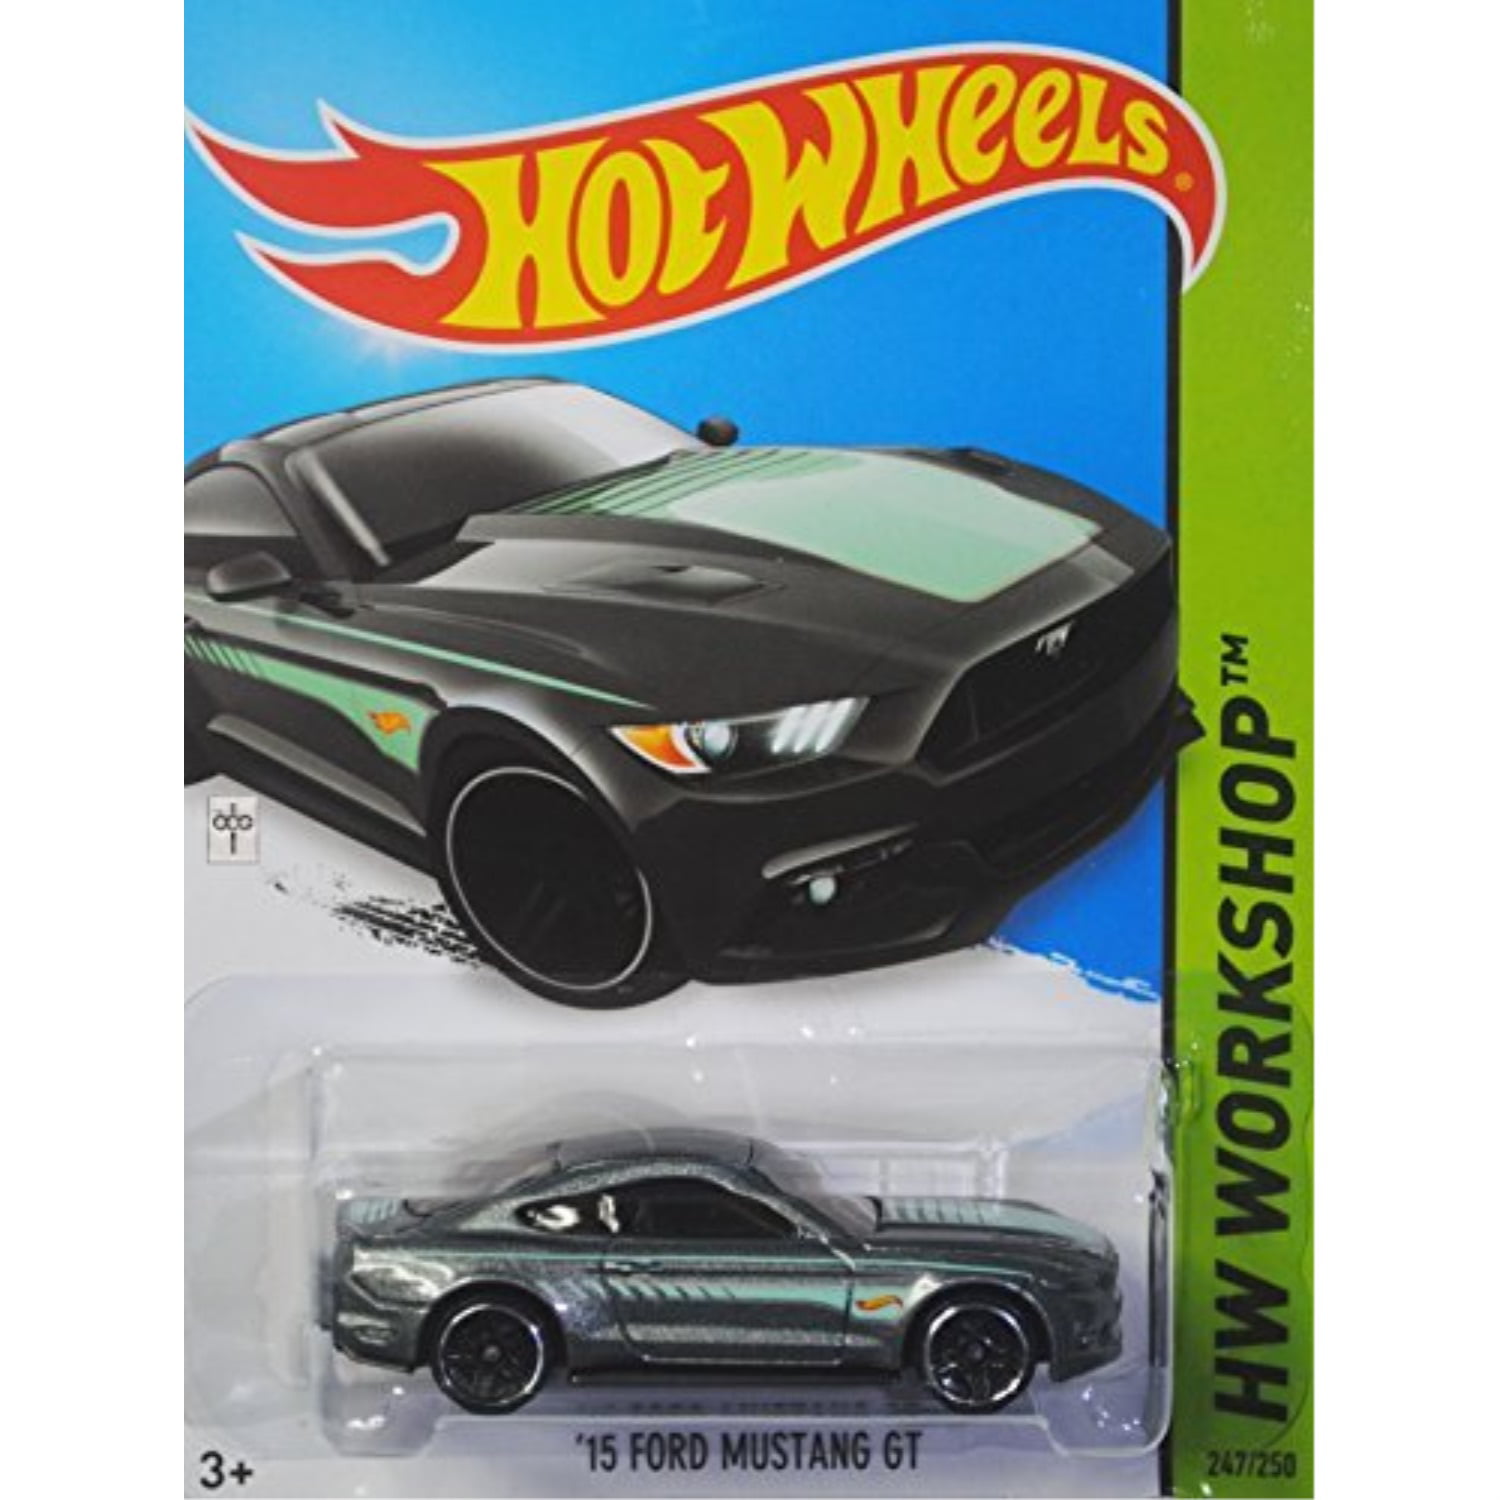 2015 ford mustang hot wheels